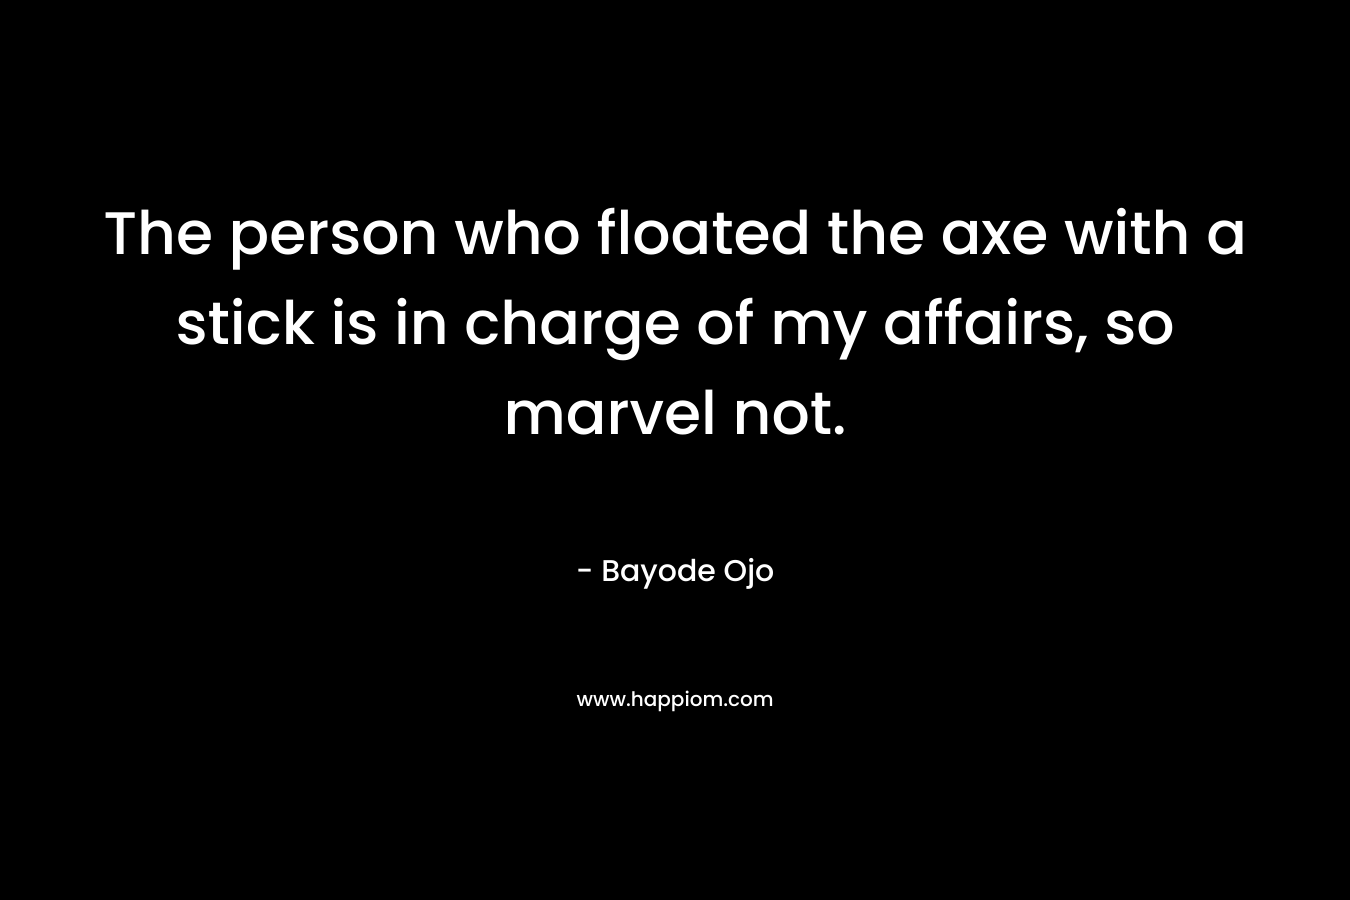 The person who floated the axe with a stick is in charge of my affairs, so marvel not. – Bayode Ojo